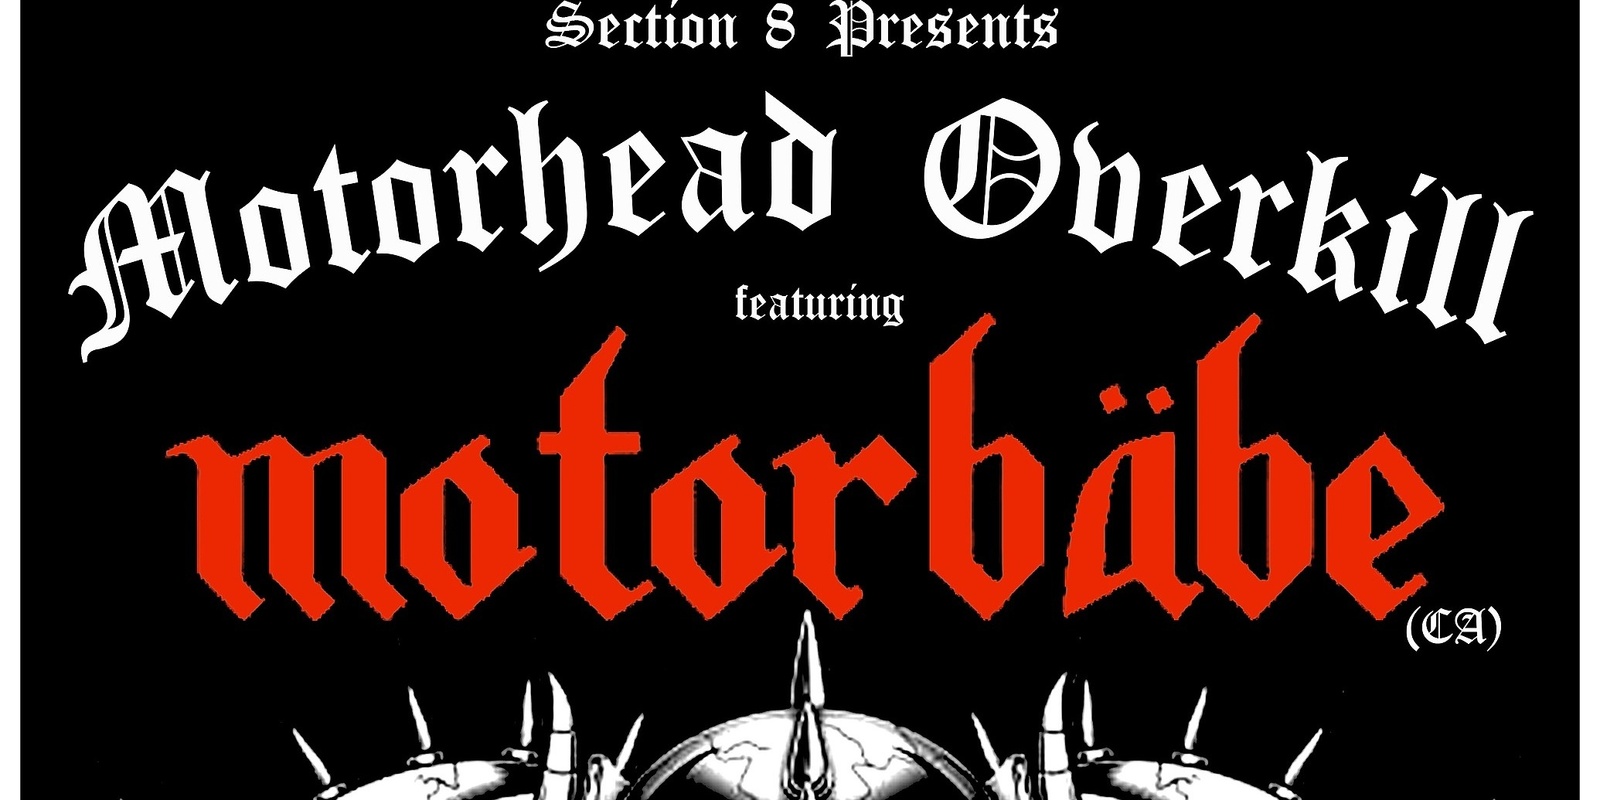 Banner image for Motorhead Overkill Show with Motorbabe(CA) , Mean Machine, and DJ Salarva